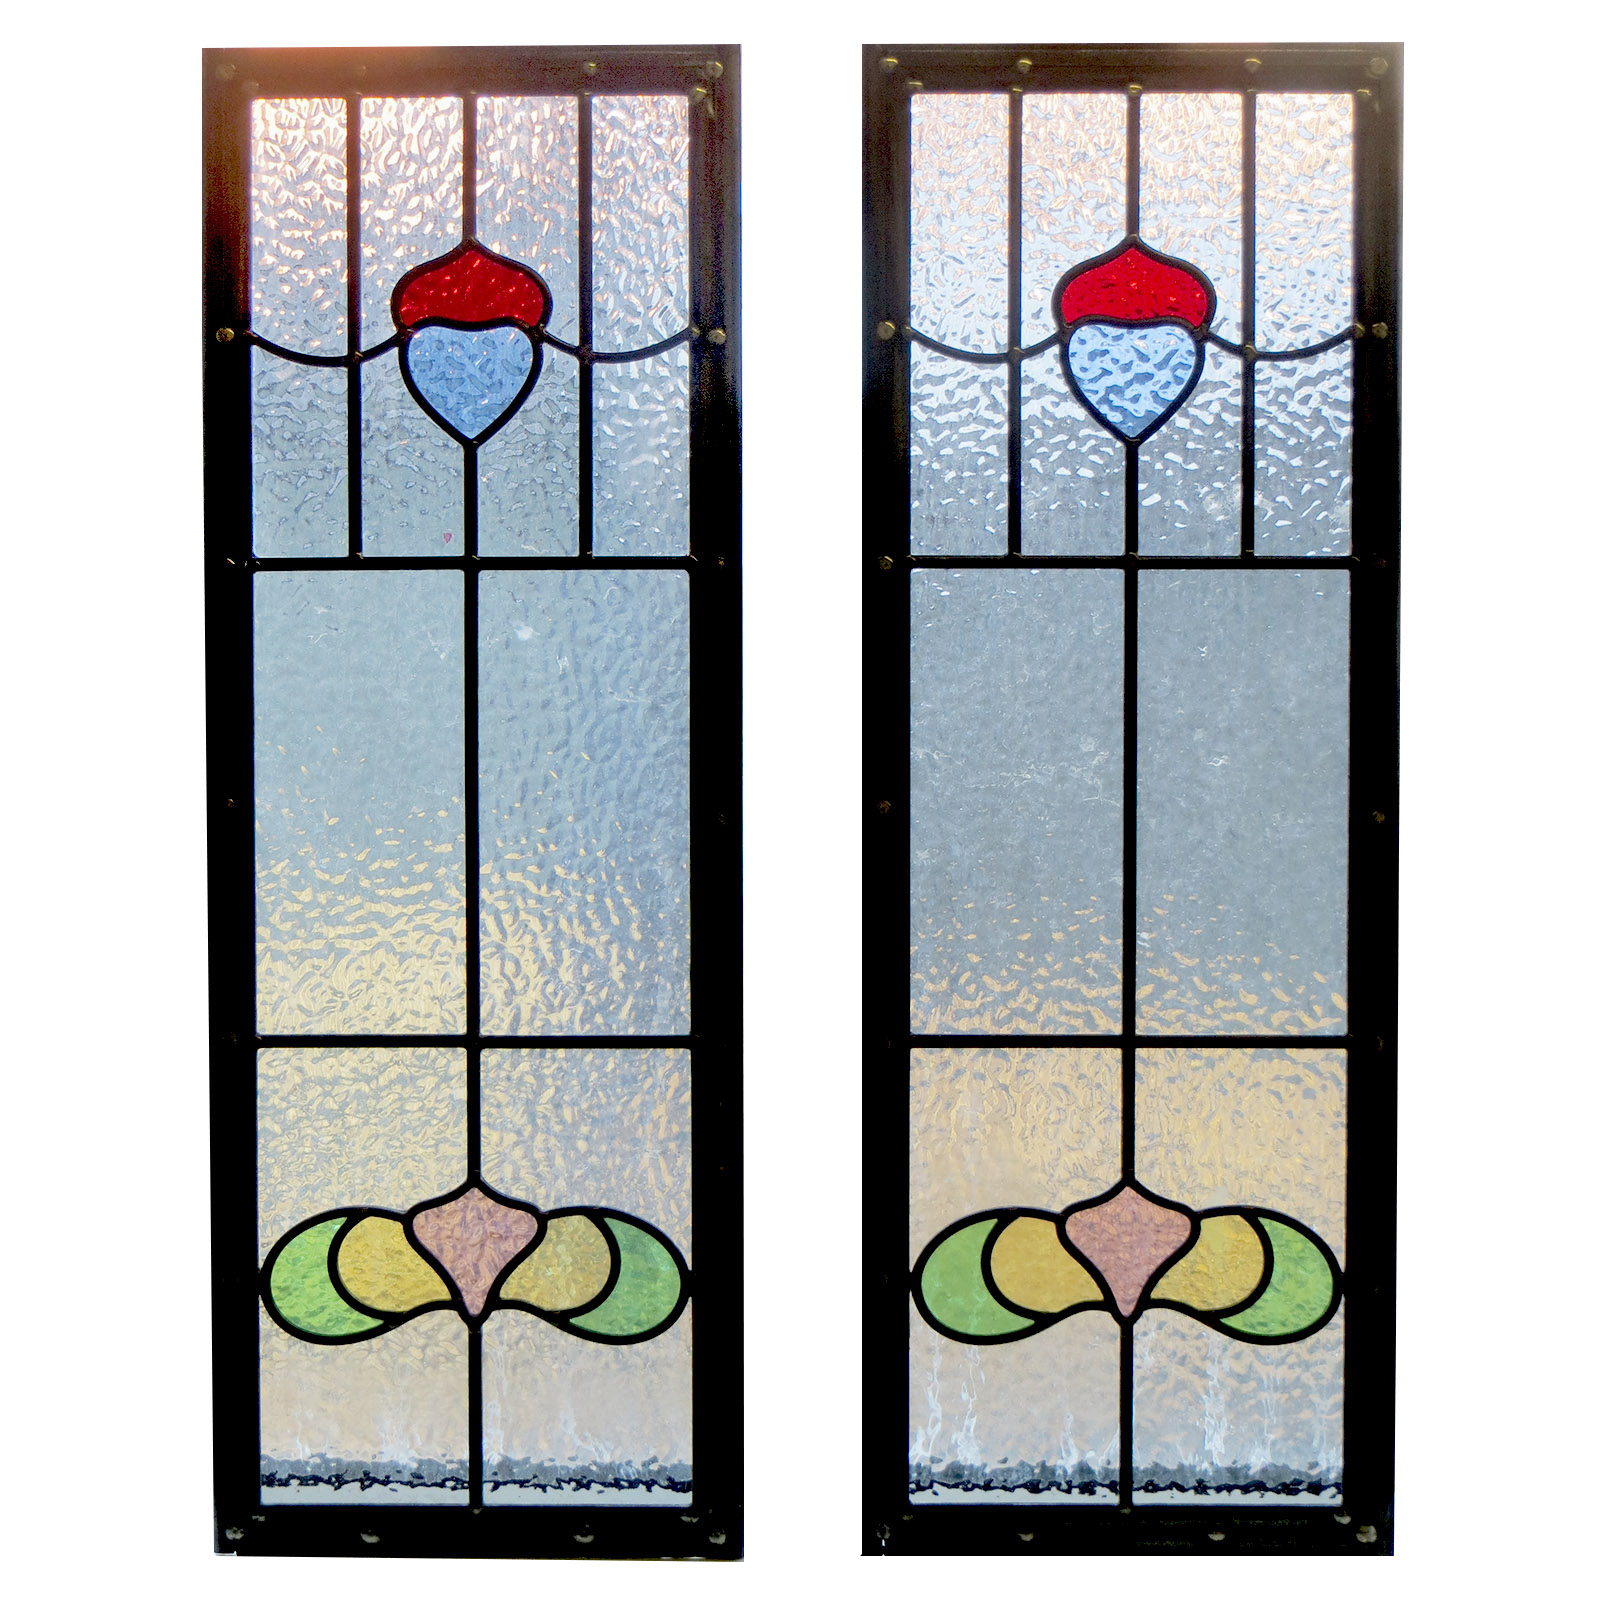 Stained glass windows church cathedral decorative Vector Image